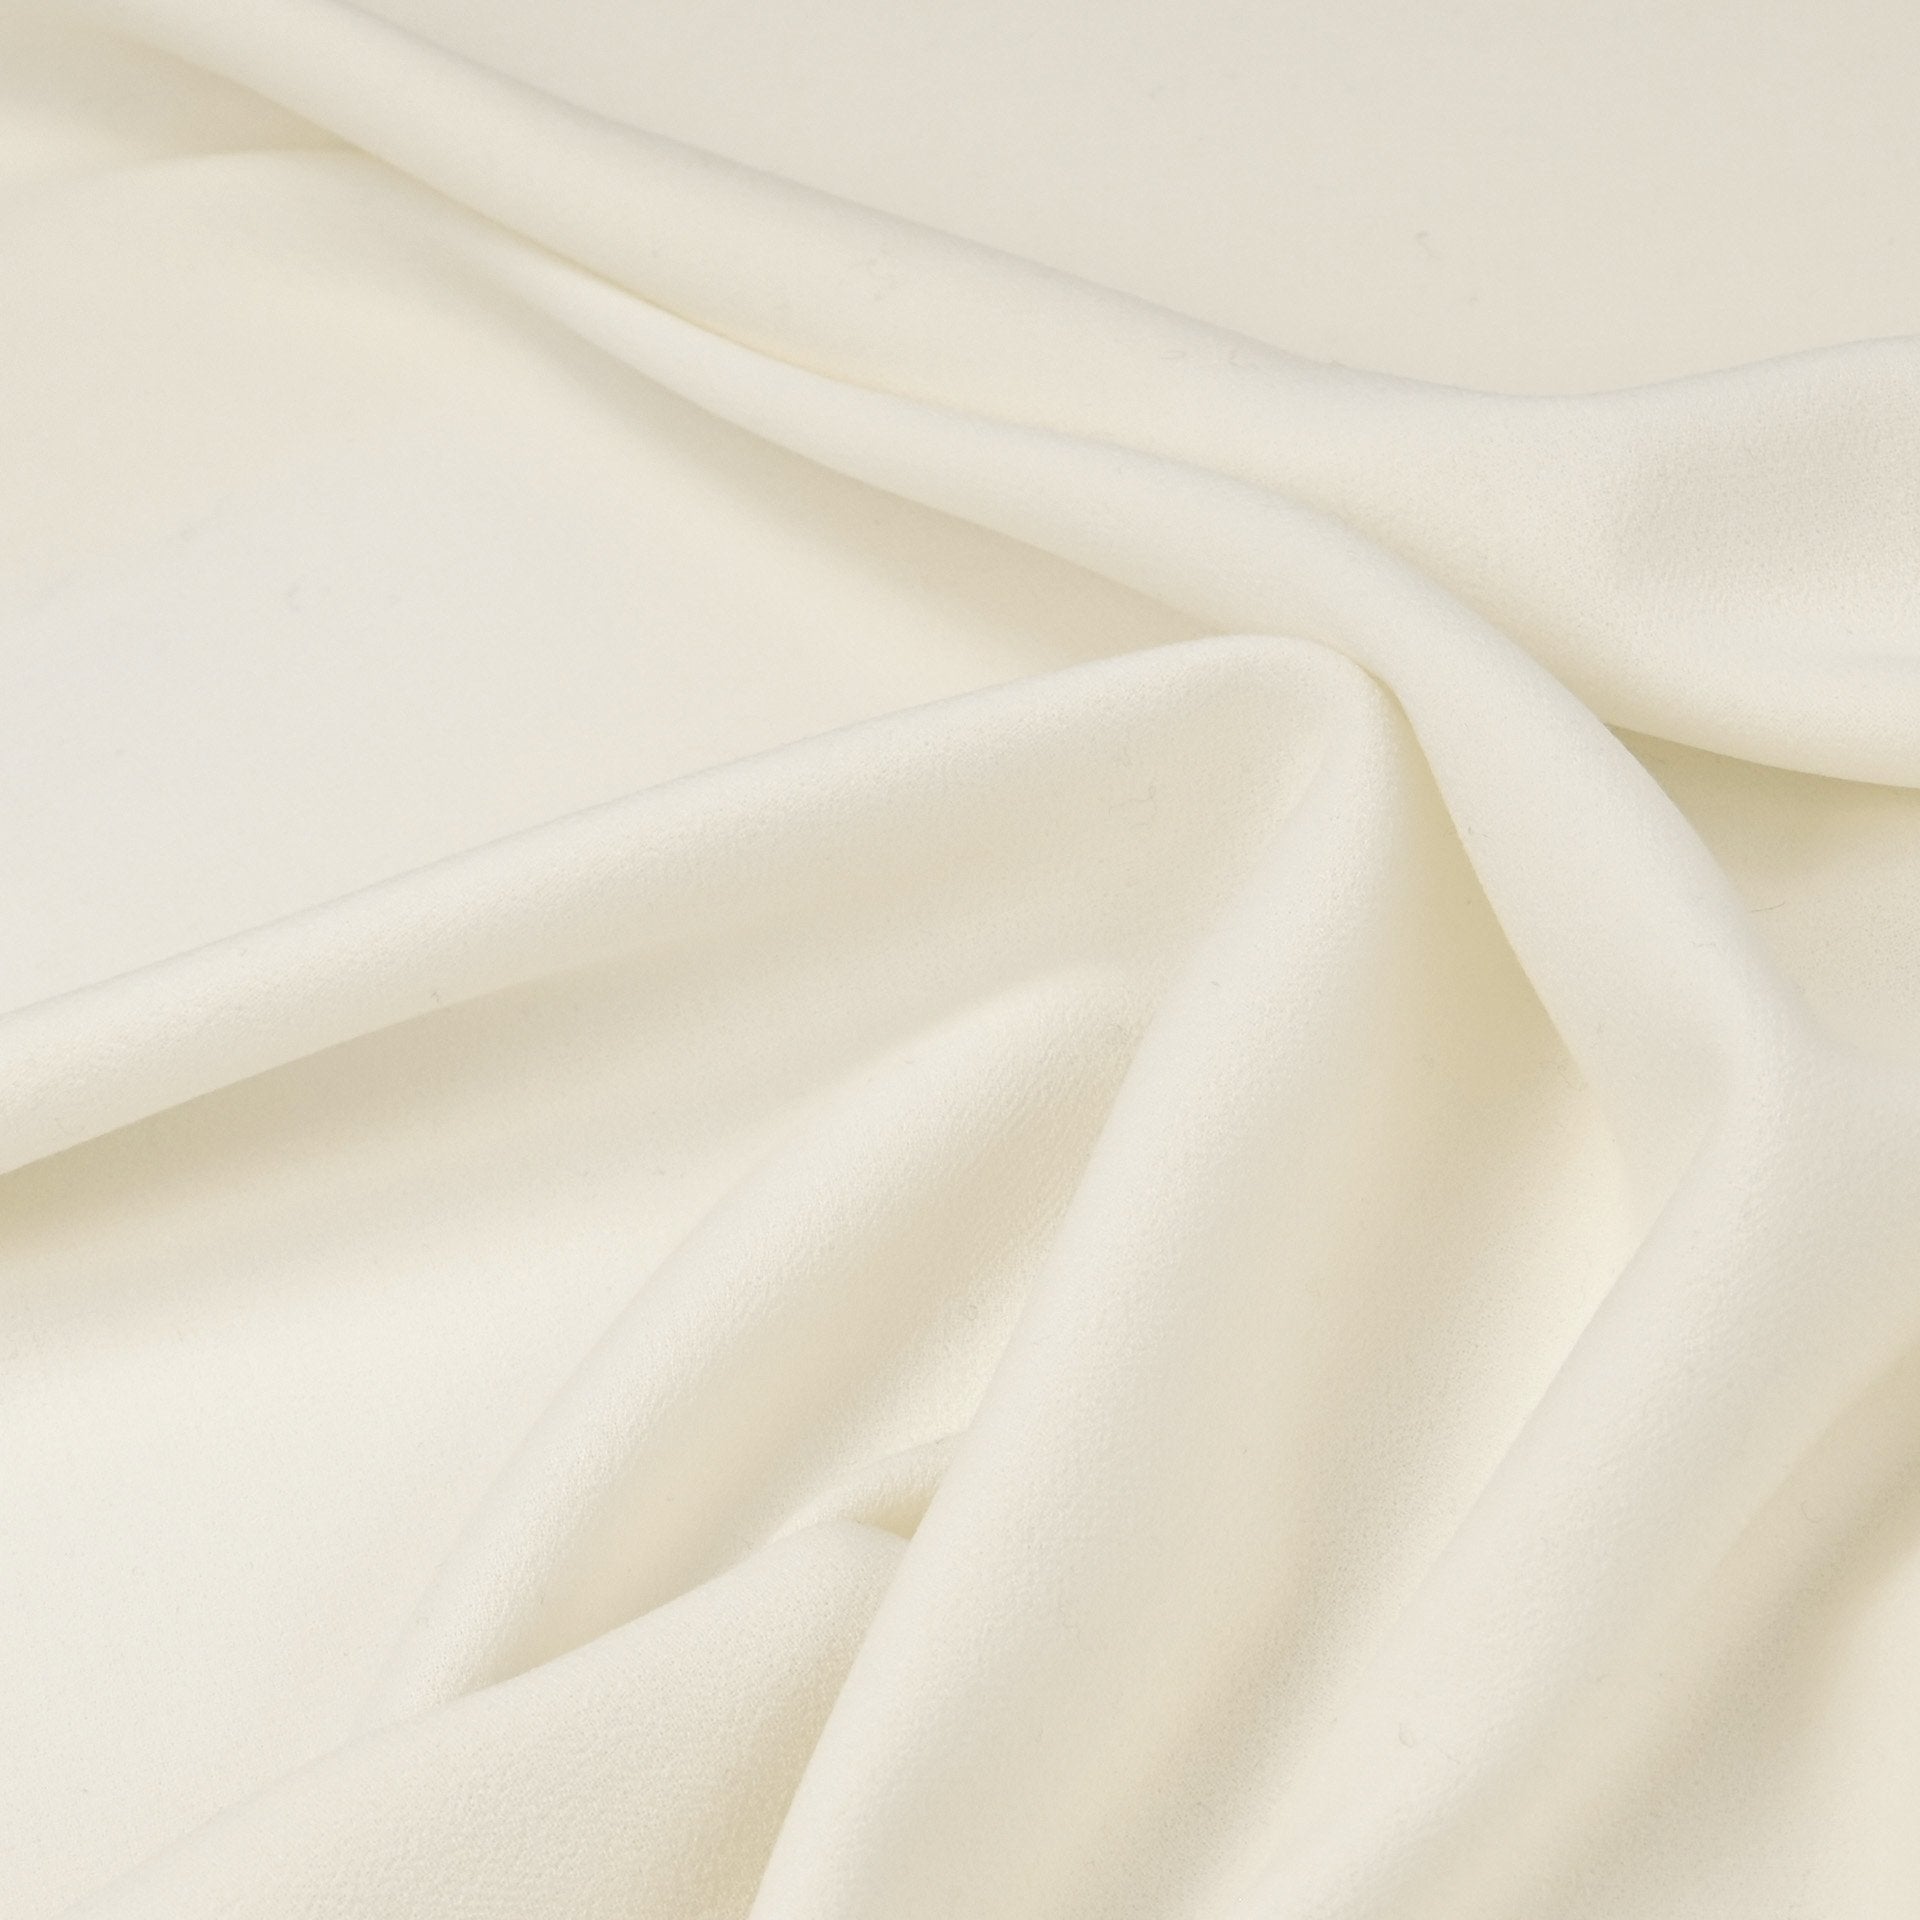 Products Cream Doublewave Crepe Fabric 97074